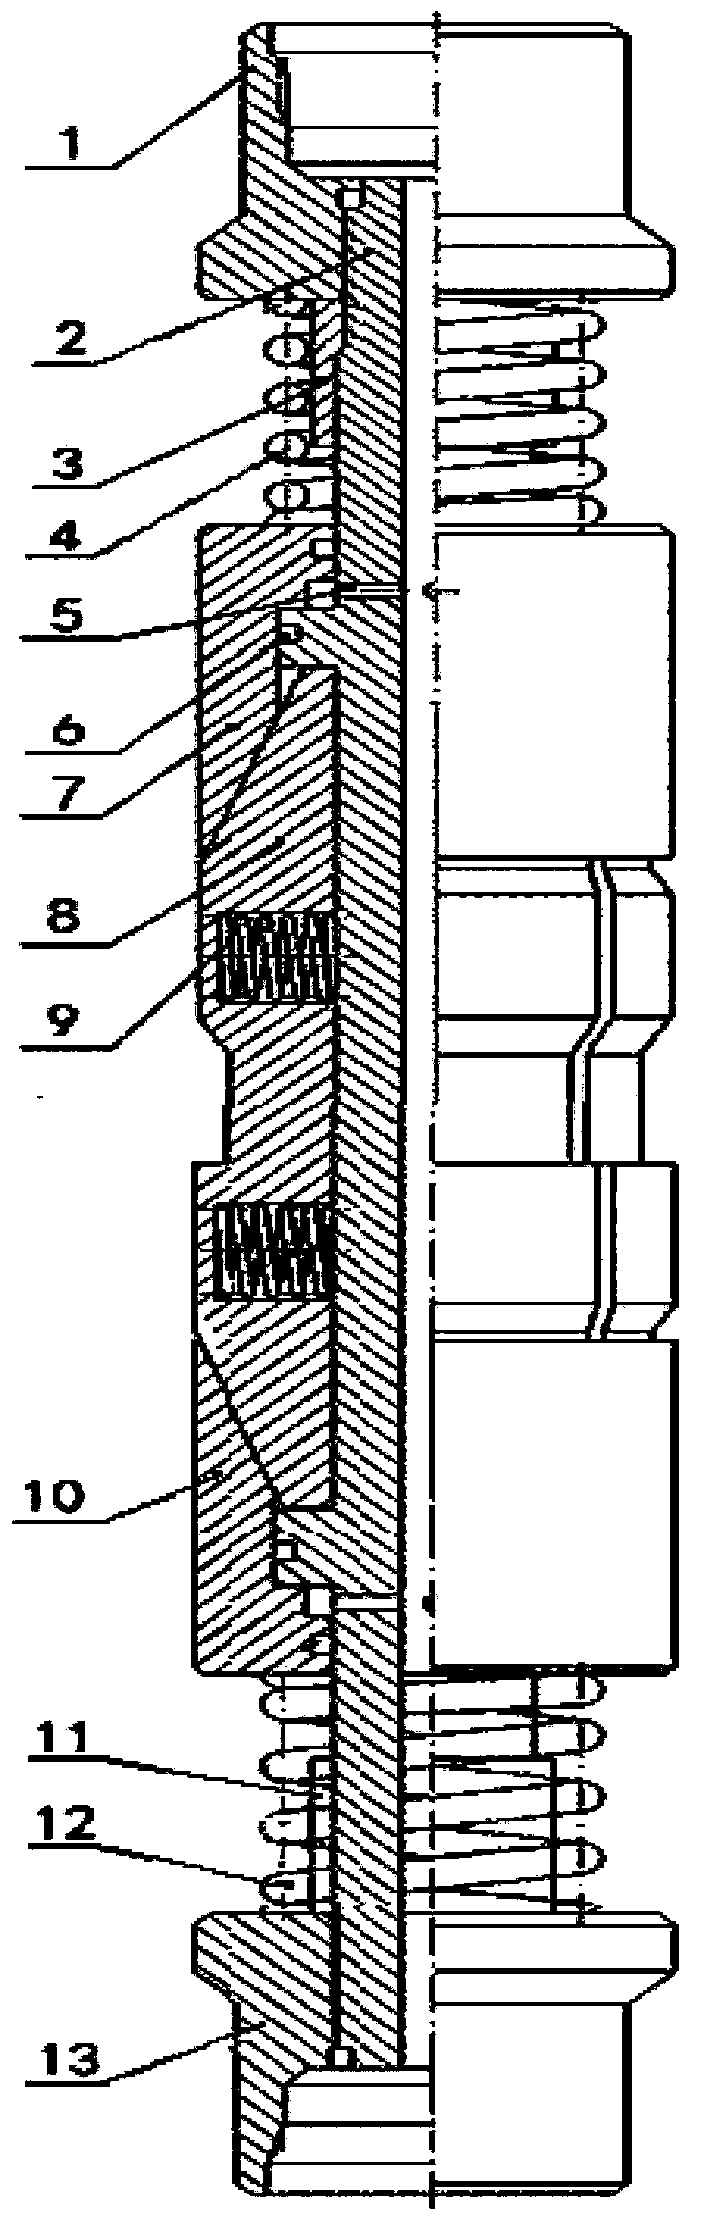 Hydraulic-type fracturing sliding sleeve opening and closing tool